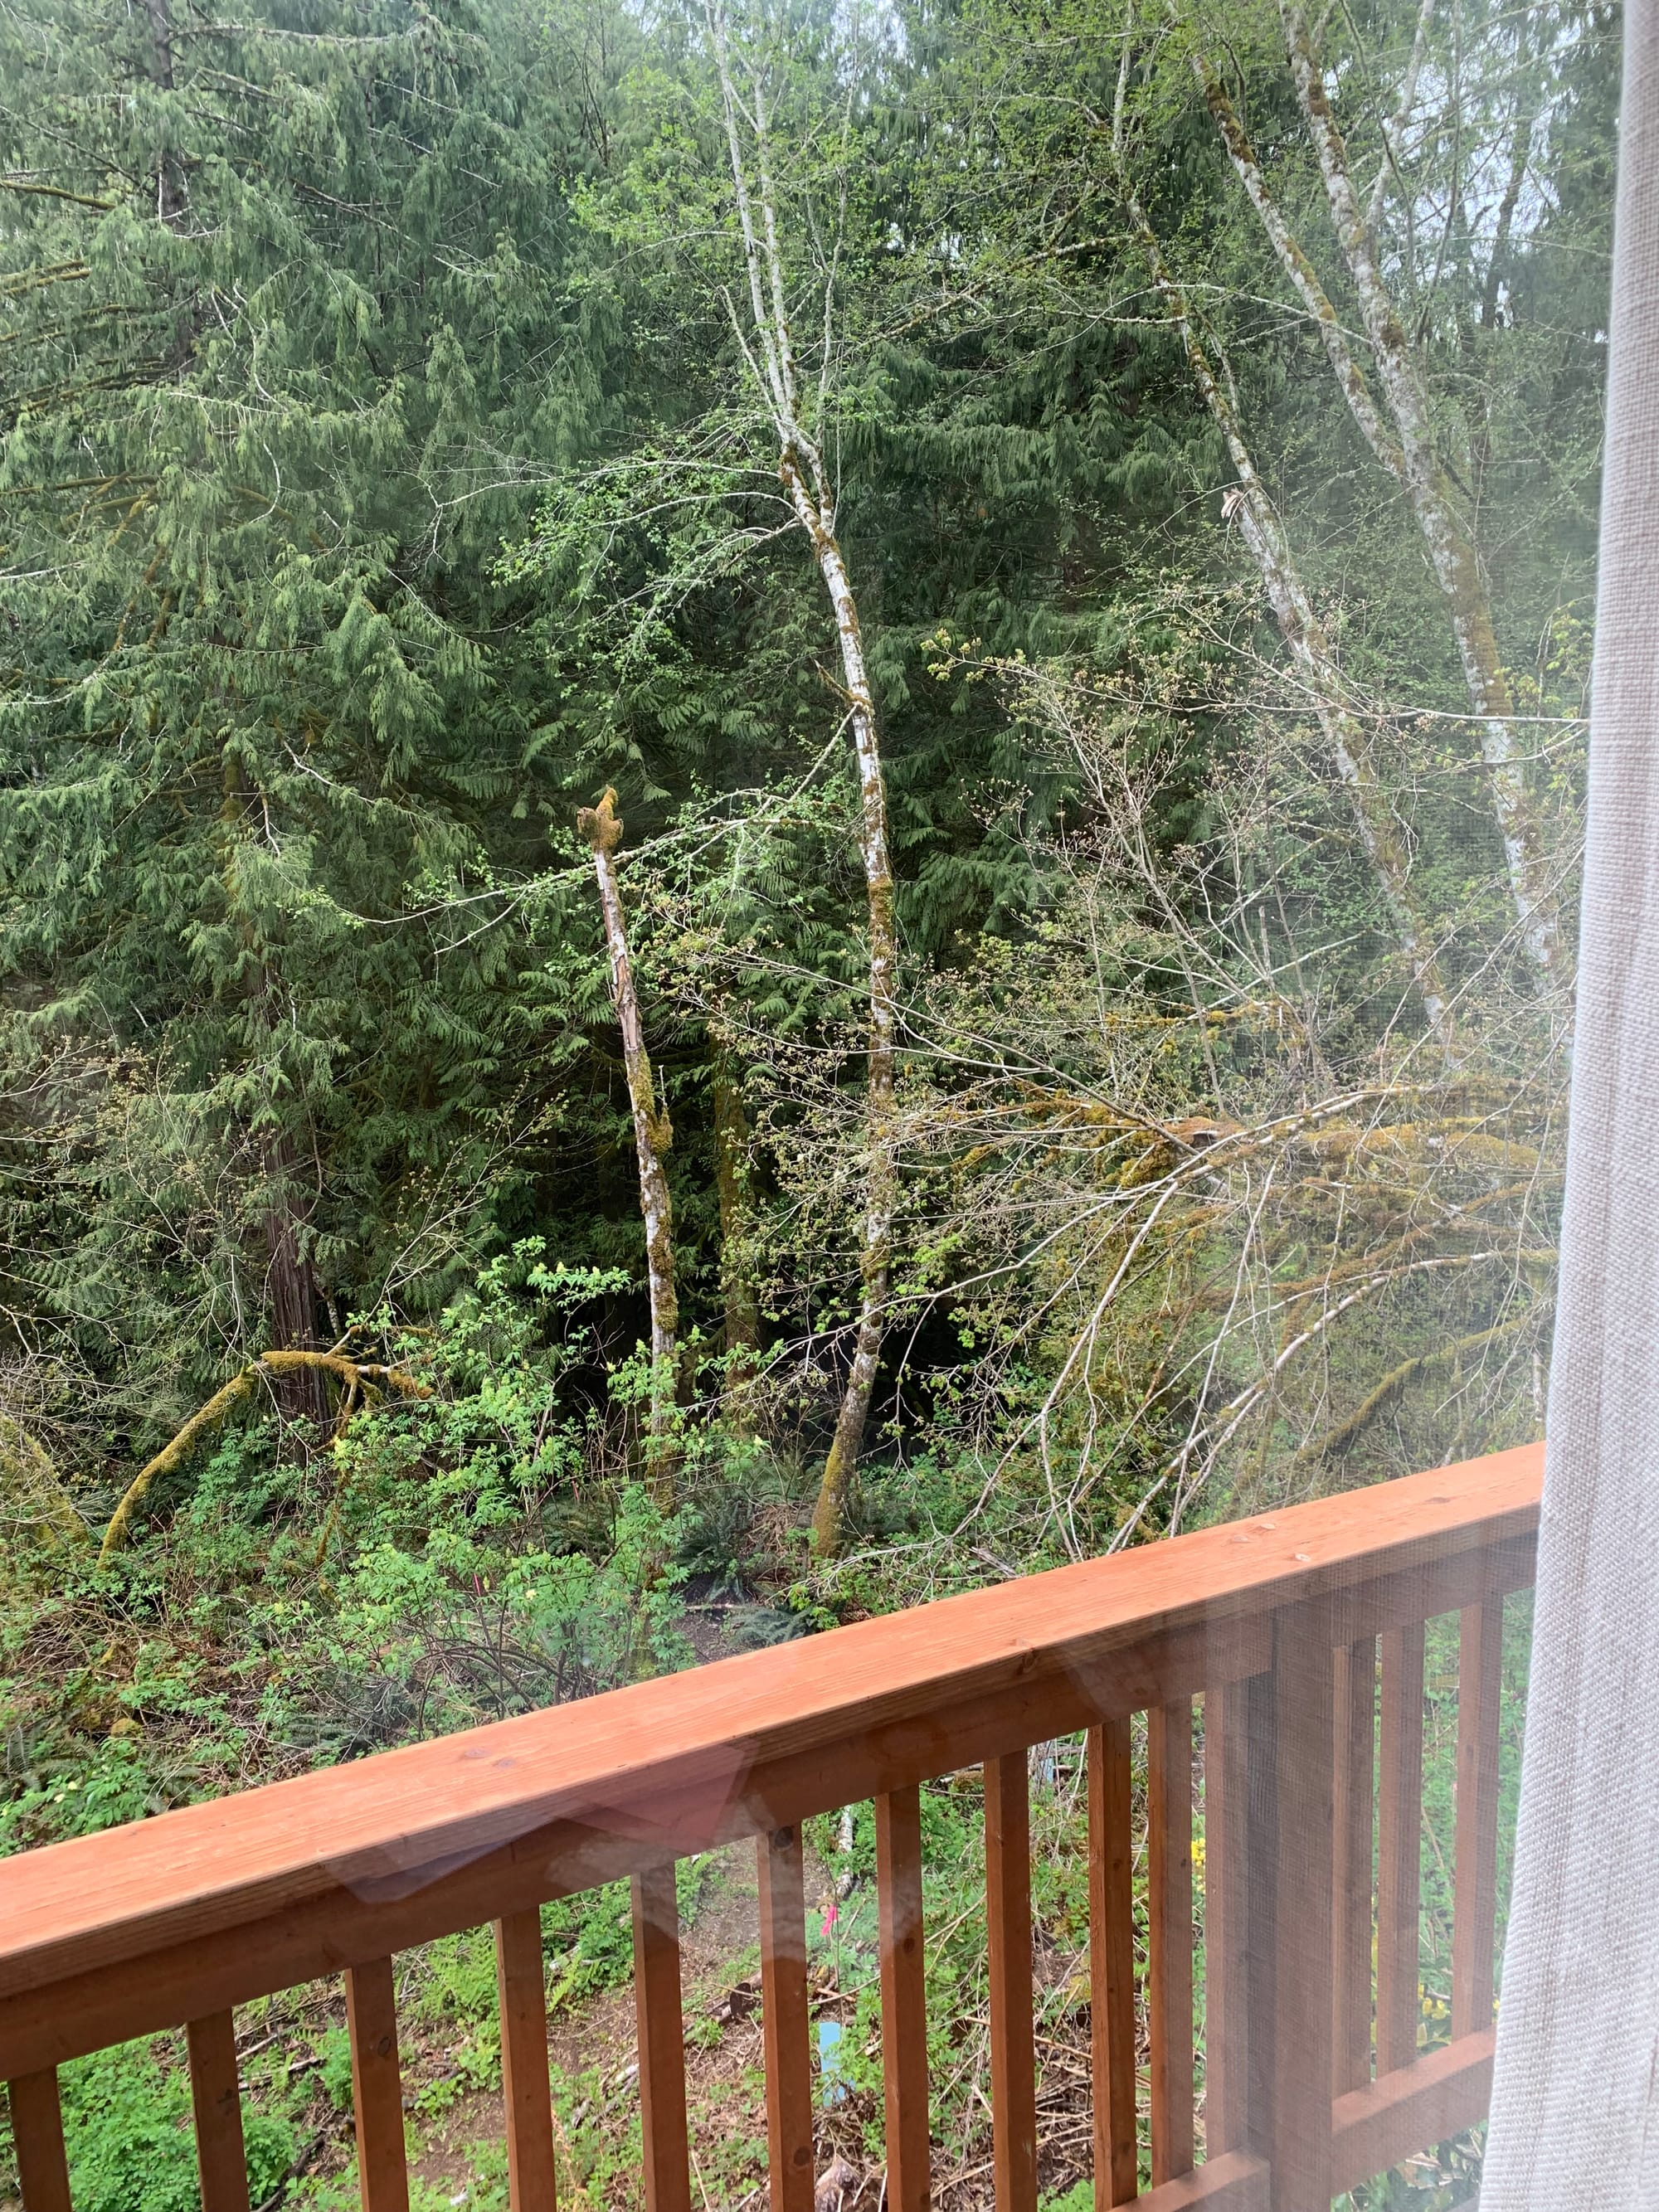 a view of green woods, a wooden railing, white curtain across the window on the right hand edge